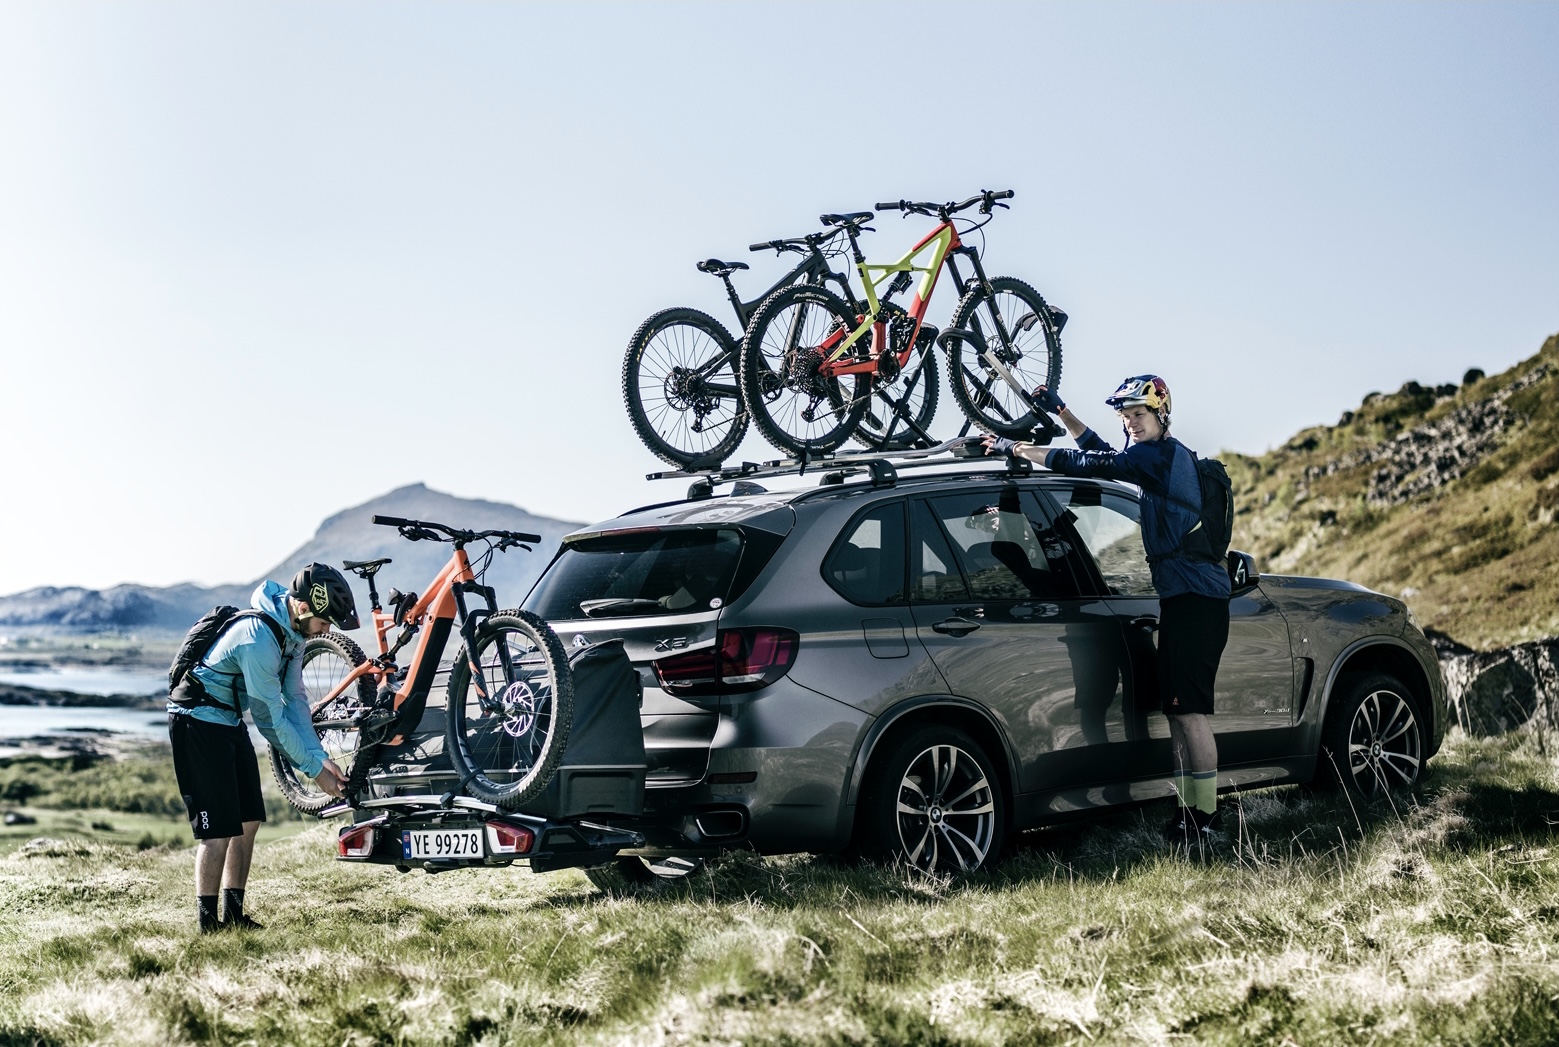 <img src="/wp-content/uploads/2018/09/sports-exchange-icon.png"/>Thule products